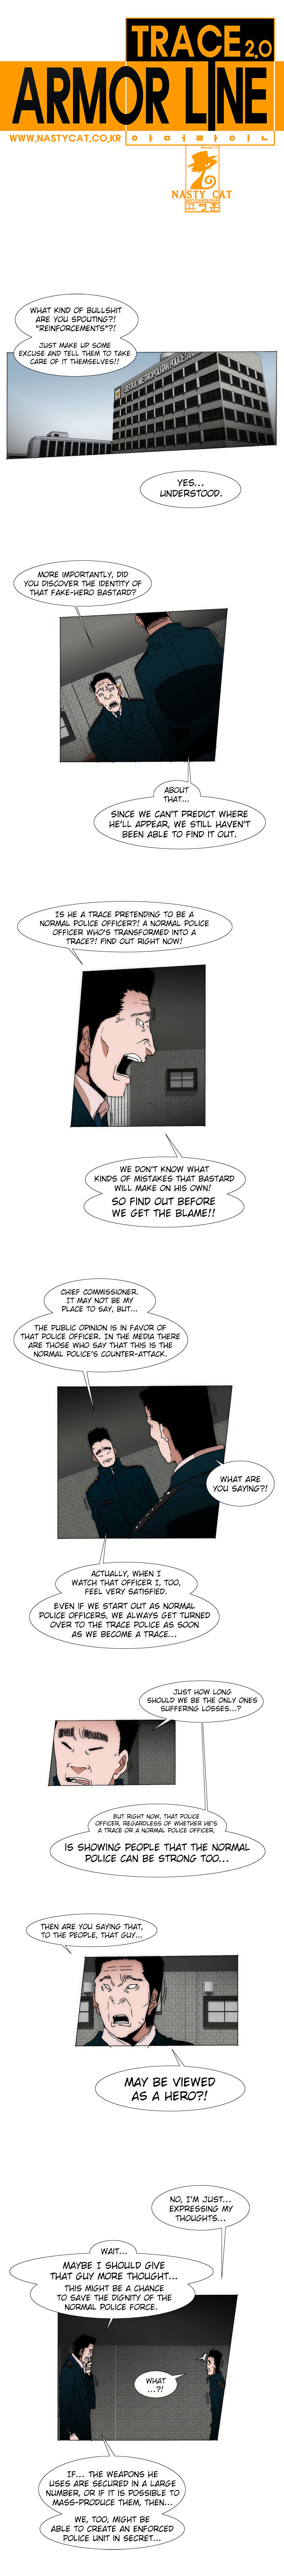 Trace 2.0 - Page 1